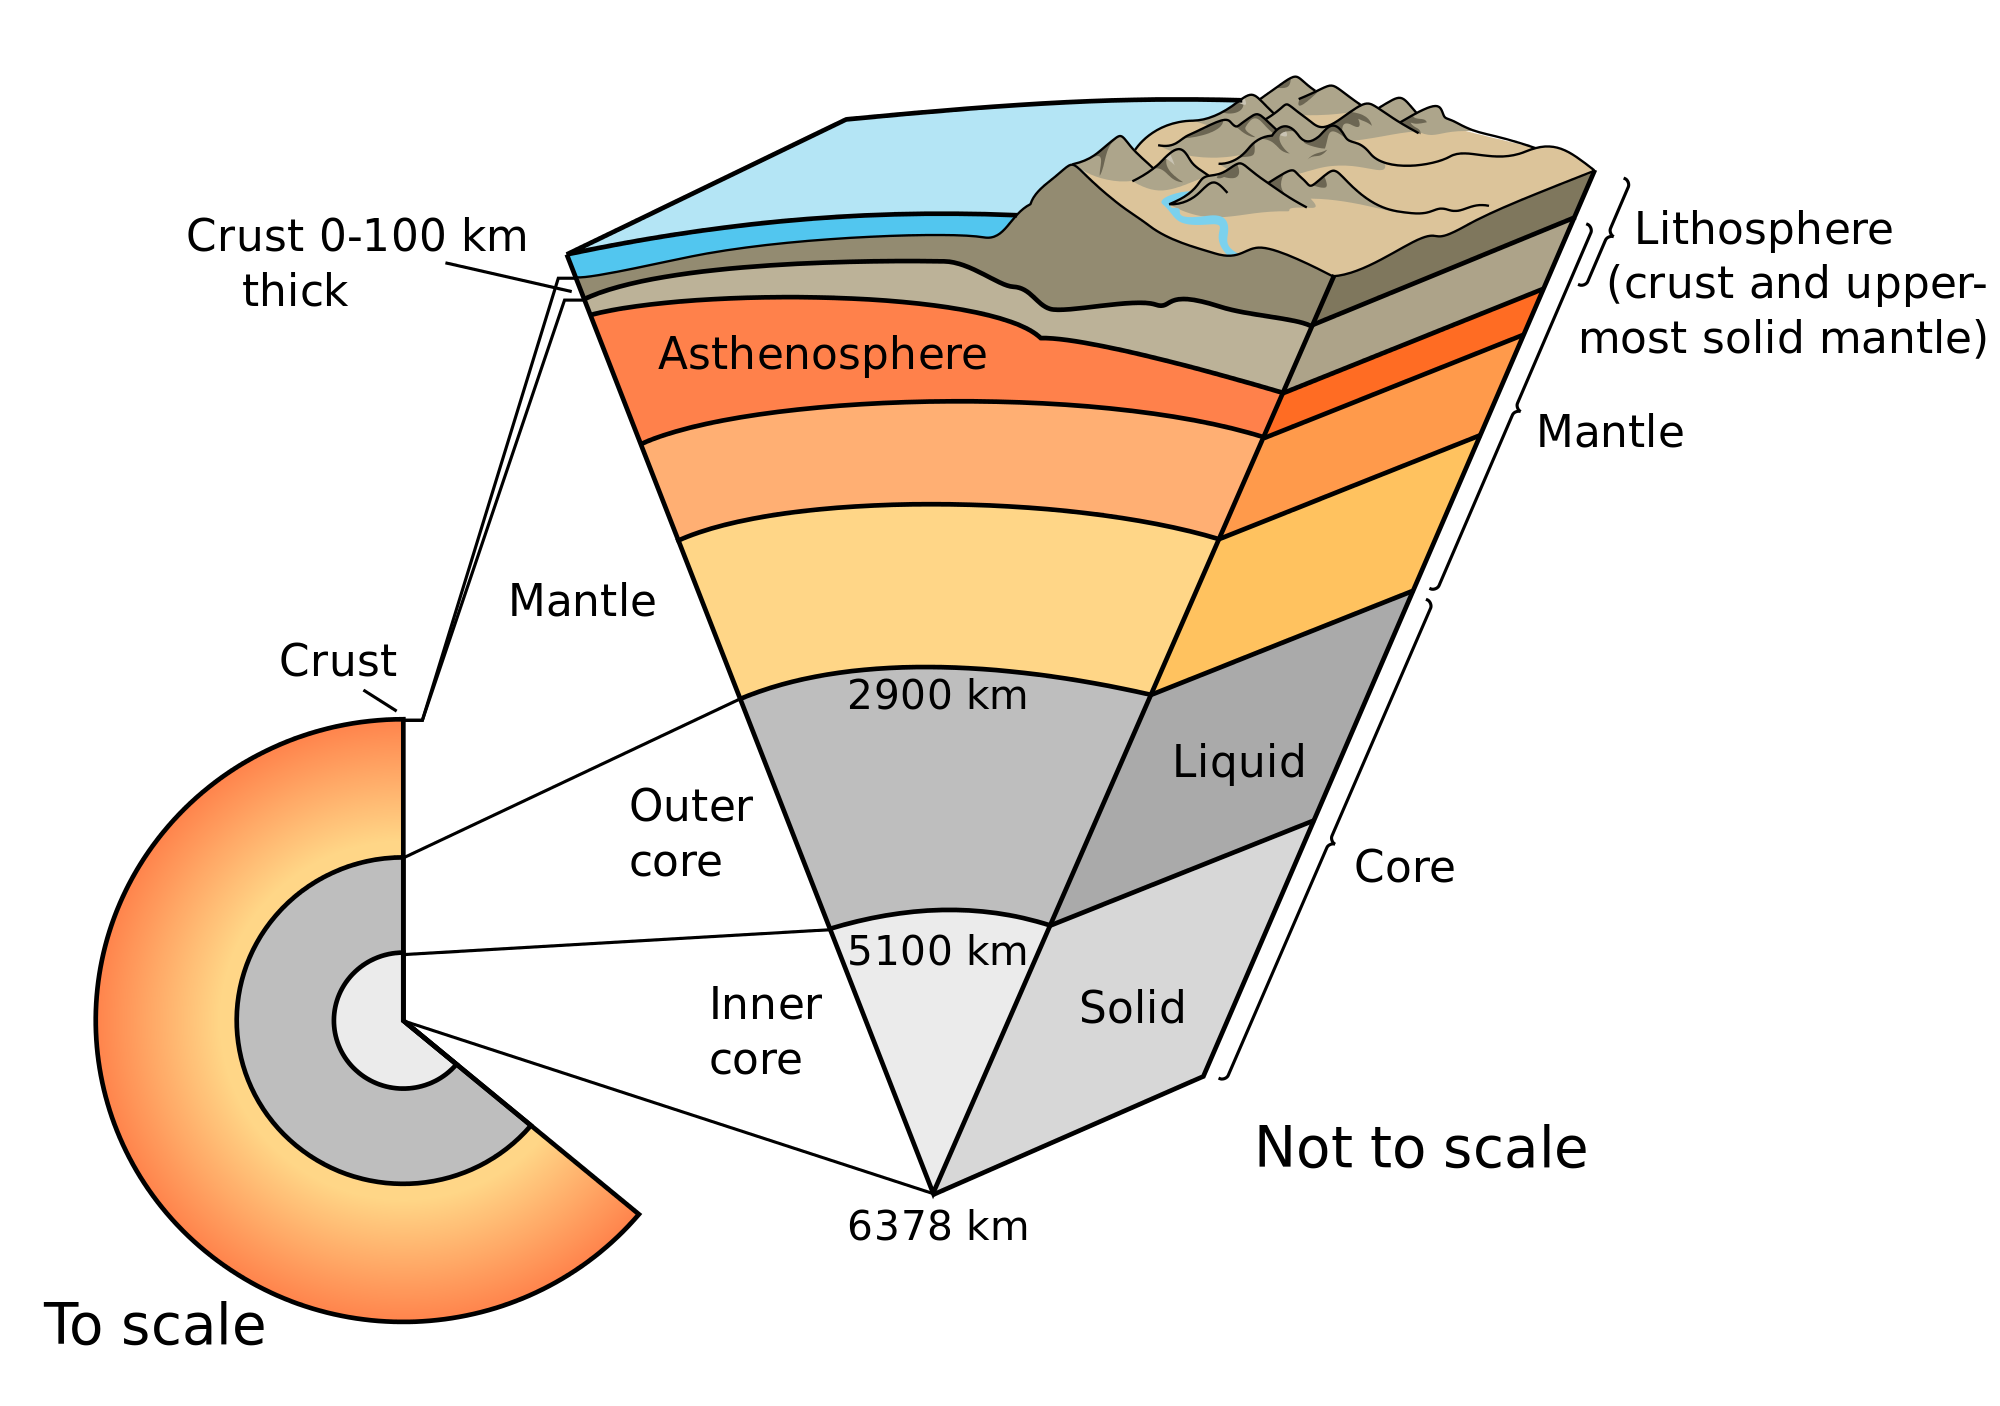 lithosphere-oceanic-and-continental-crust-by-ryam